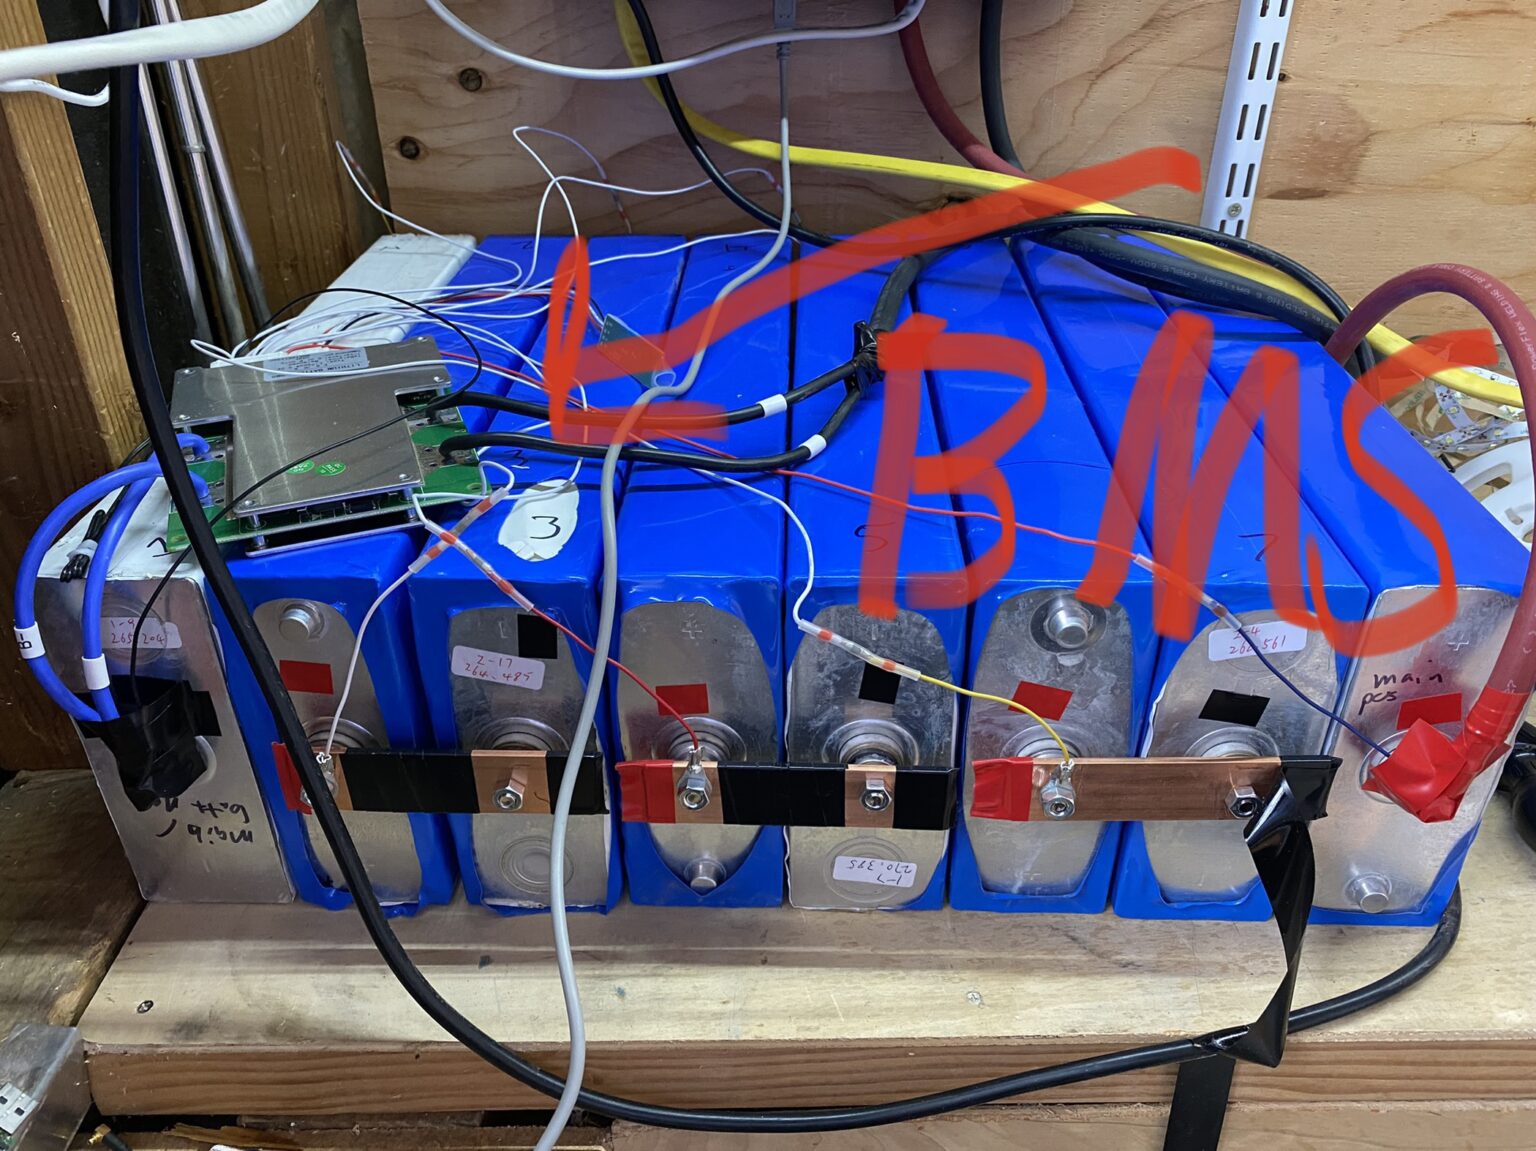 DIY solar with battery backup - up and running! - Austin's Nerdy Things